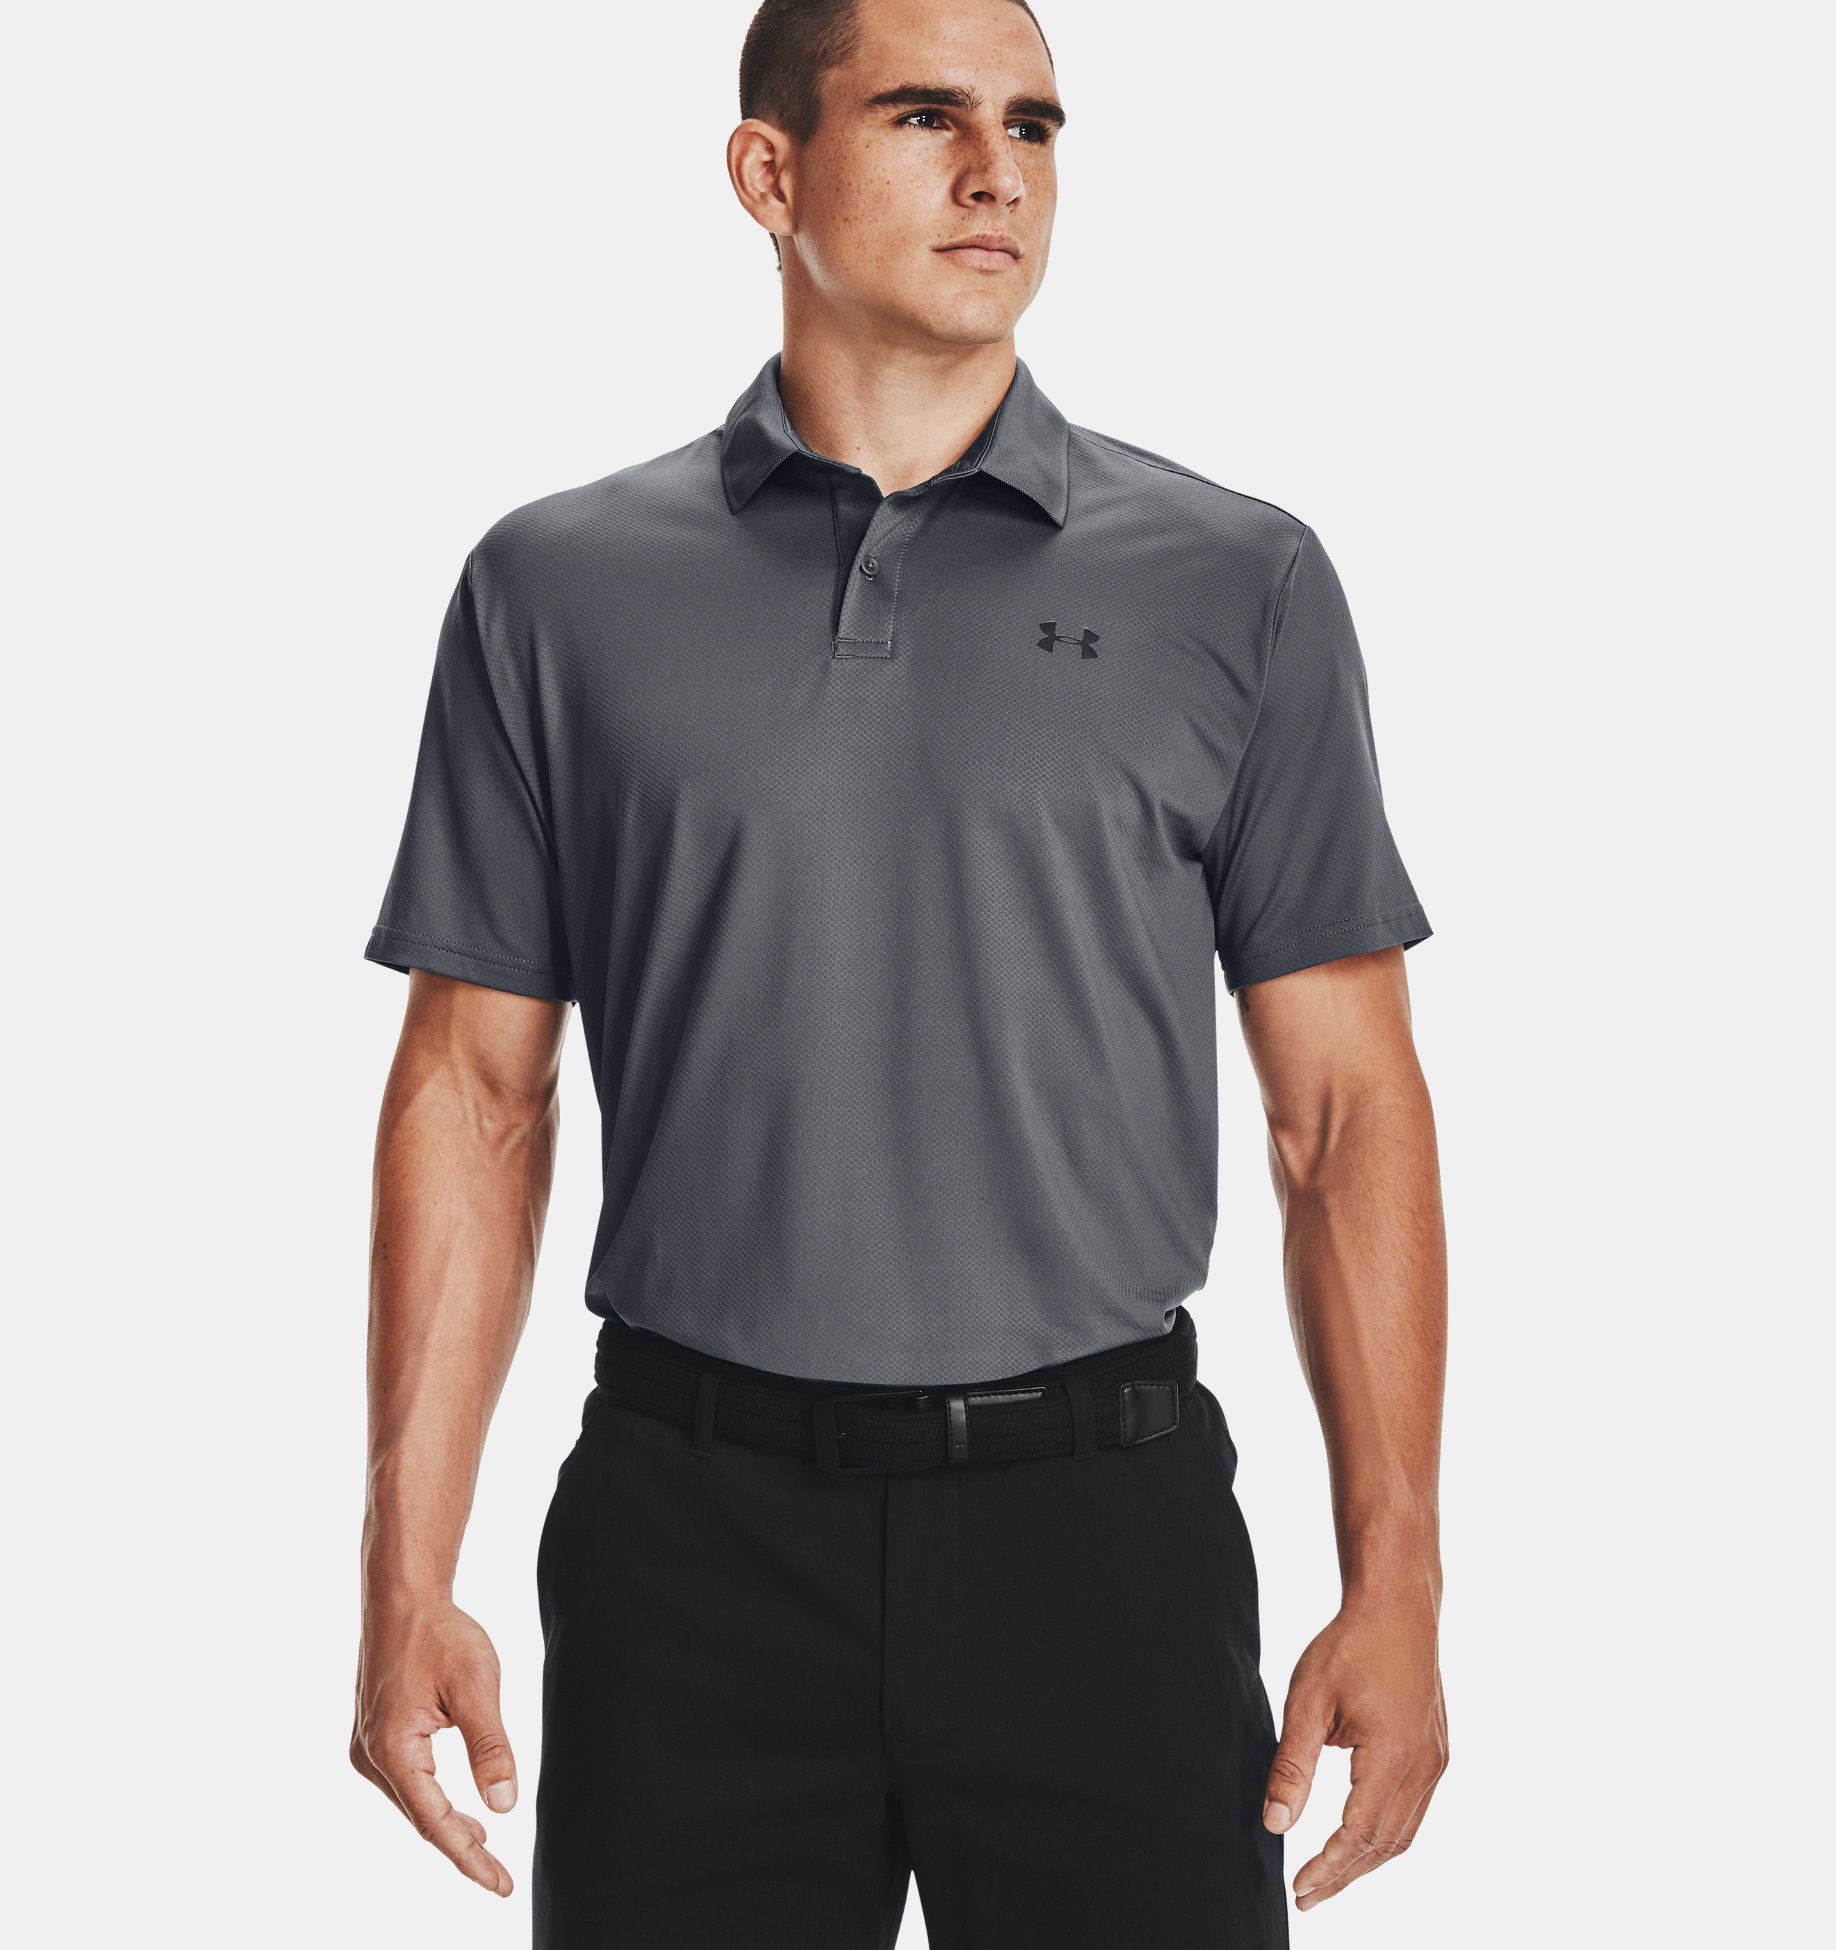 Men’s Under Amour Performance Polo is $21.97